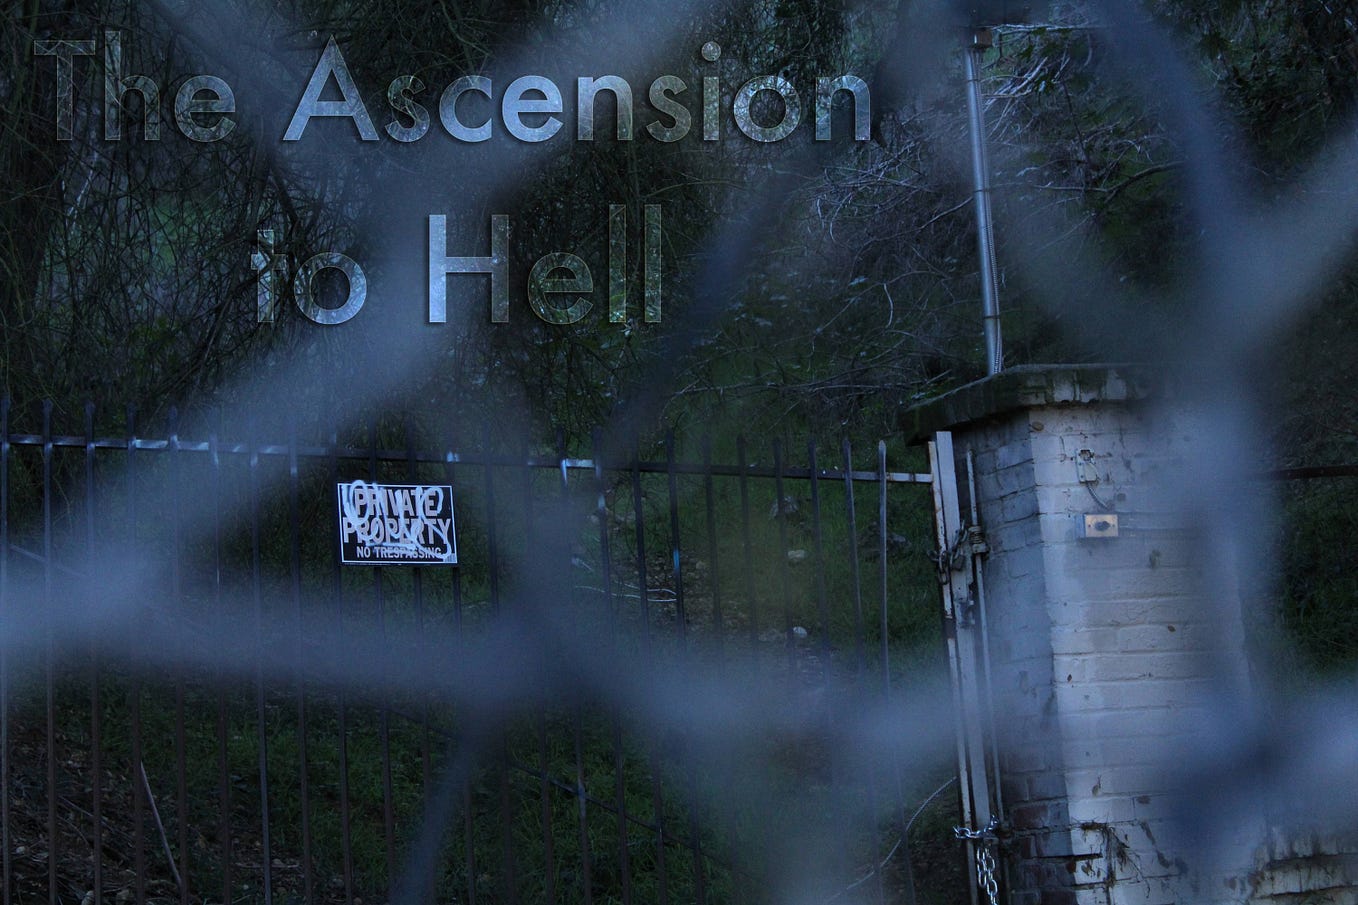 The Ascension to Hell